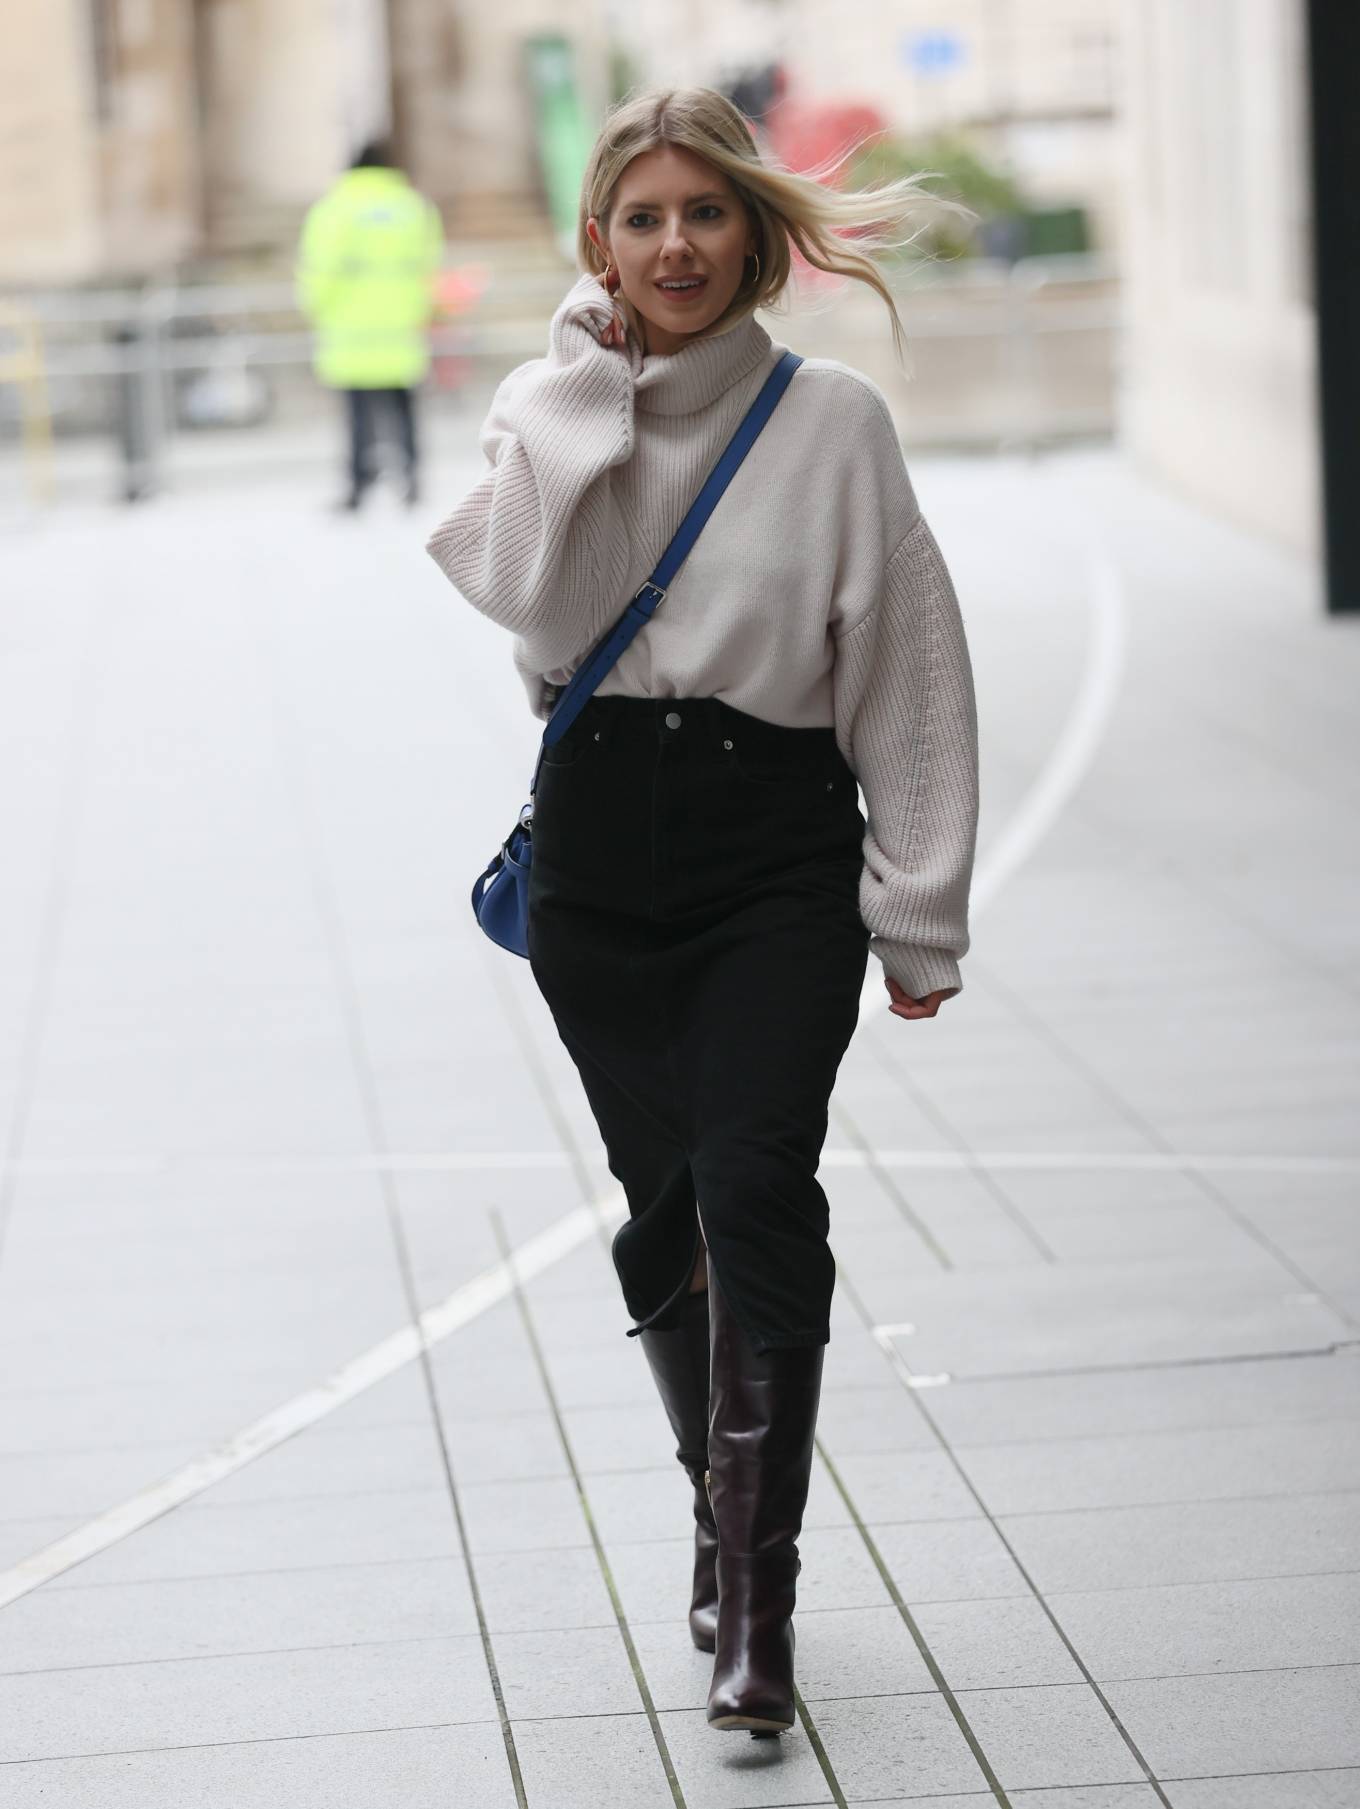 Mollie King - Makes fashionable arrival at BBC Radio 1 in London.